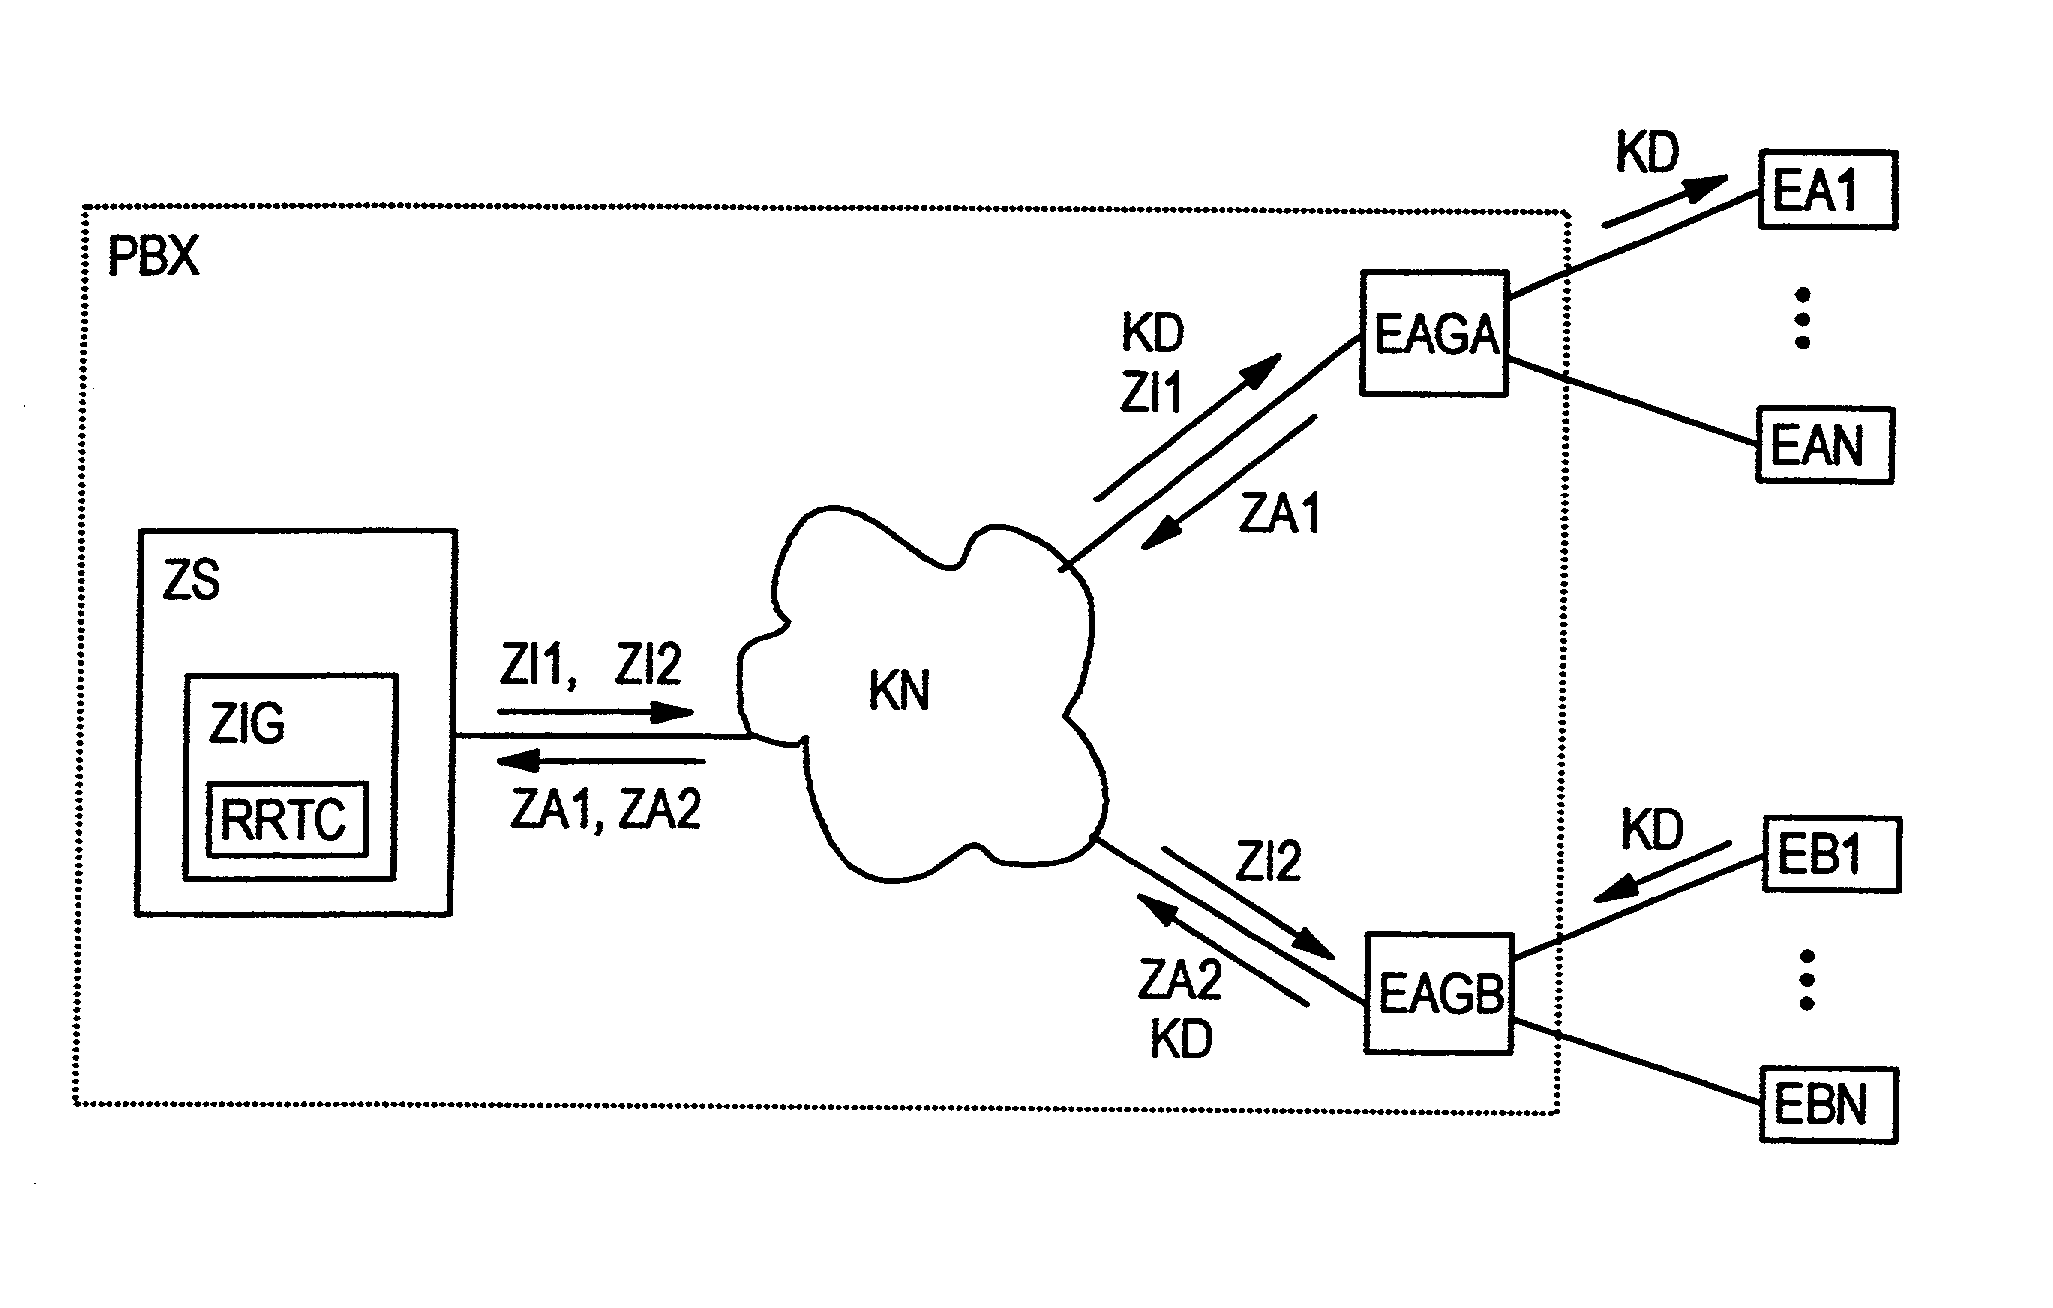 System for synchronizing communications system components coupled via a communications network